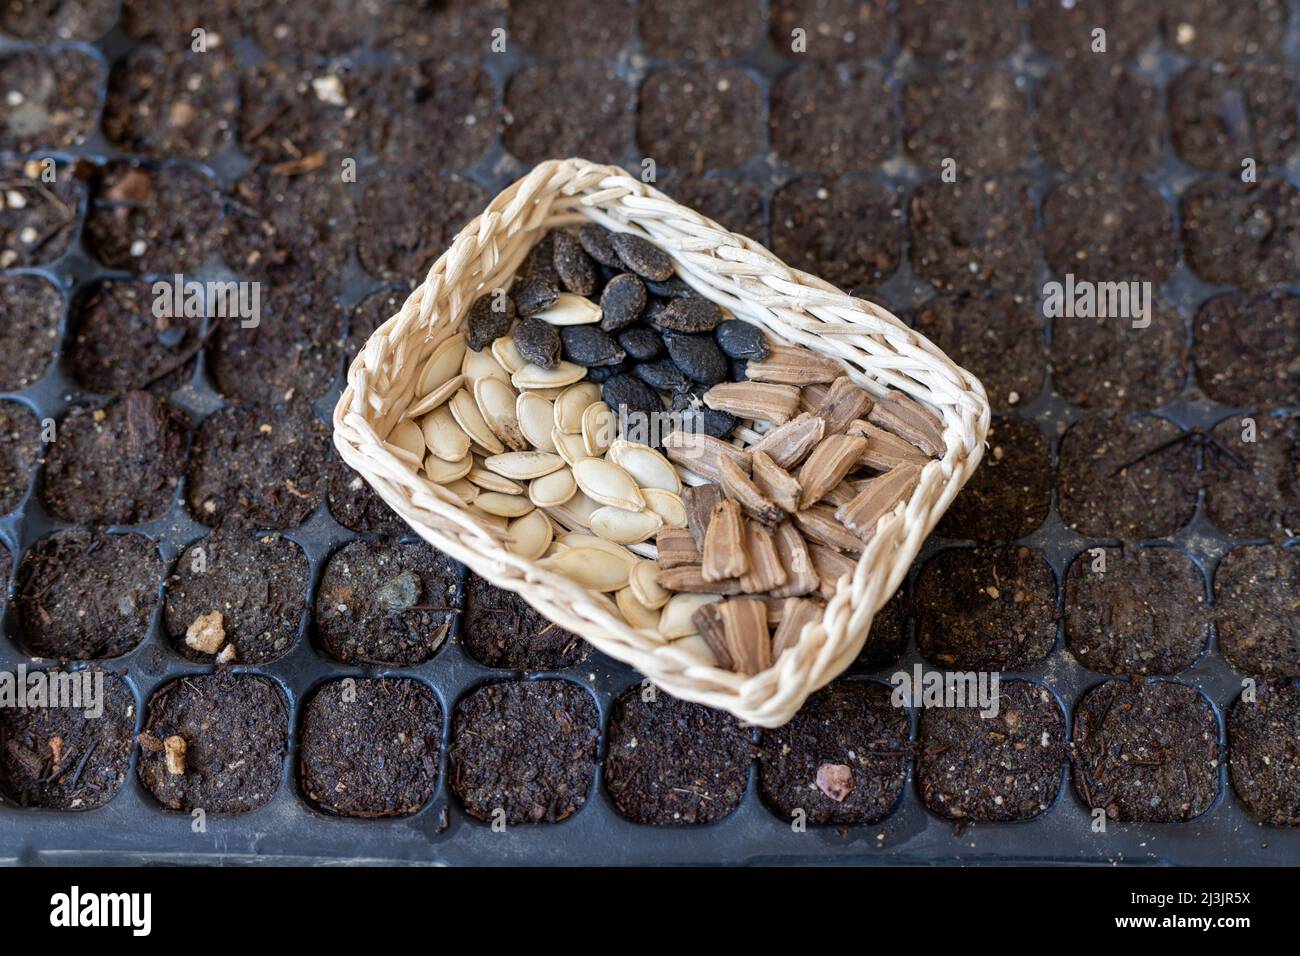 Mixed vegetable seeds in a small basket Stock Photo